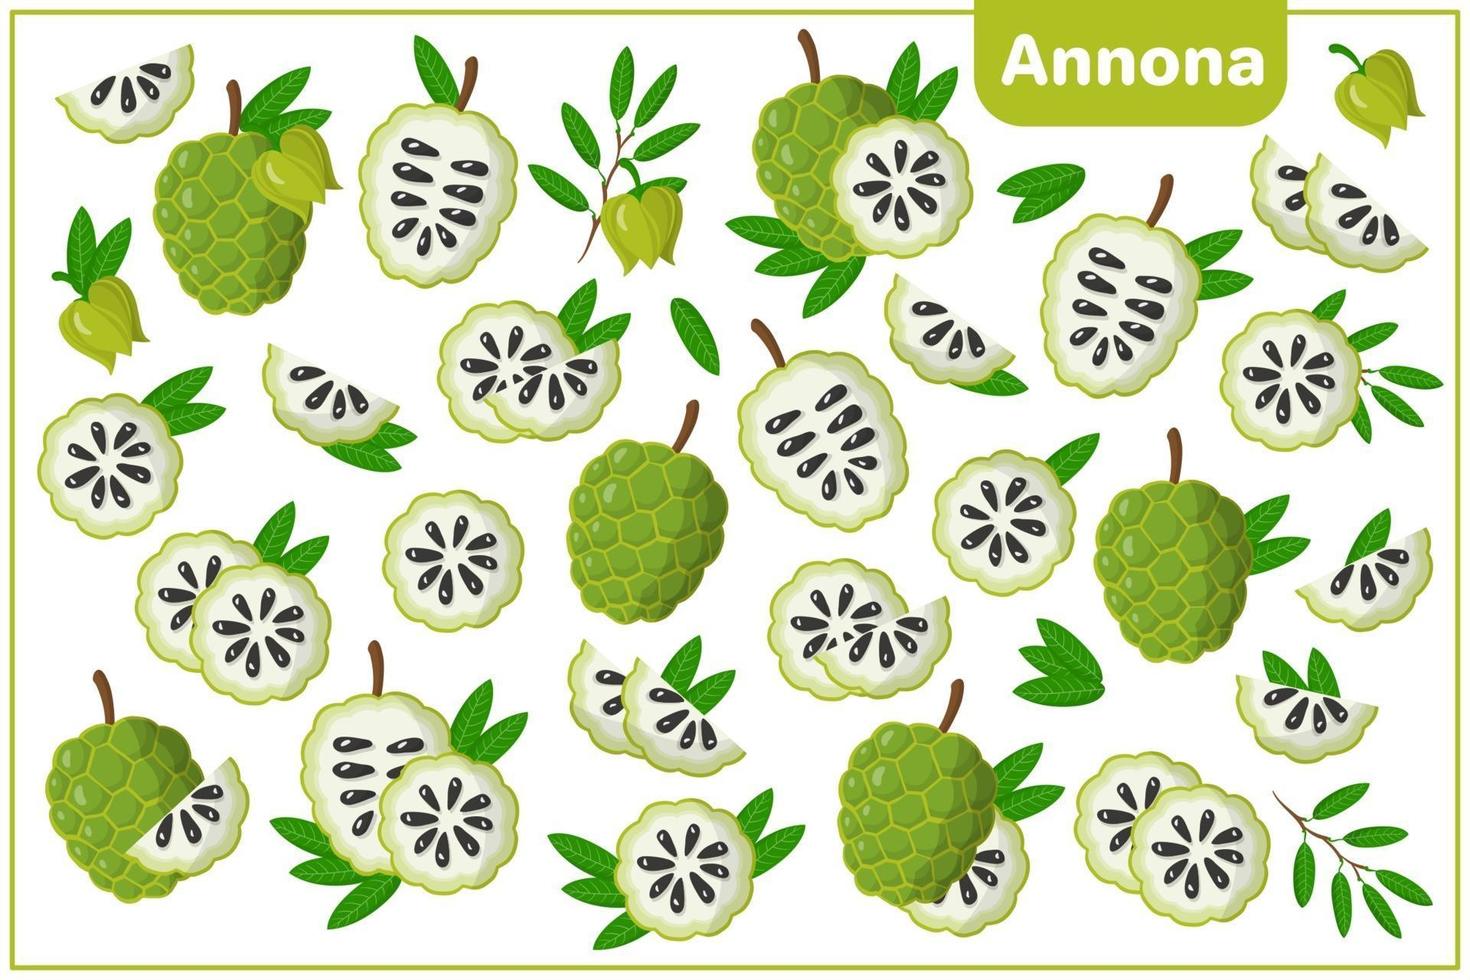 Set of vector cartoon illustrations with Annona exotic fruits, flowers and leaves isolated on white background